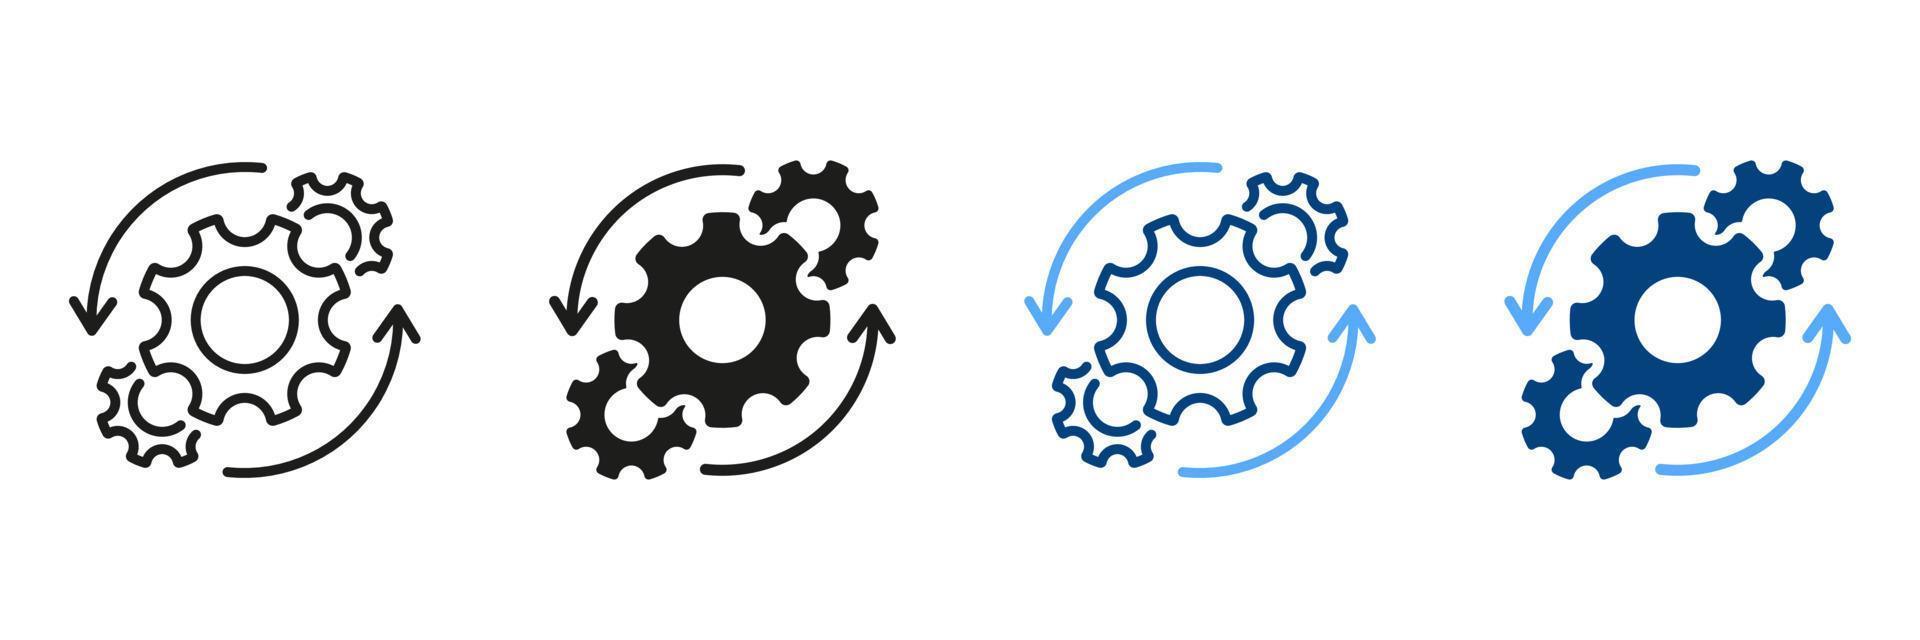 Workflow Cog Wheel Symbol Pictogram. Circle Gear Work Progress Line and Silhouette Icon Set. Gear and Round Arrow Business Technology Process Symbol Collection. Isolated Vector Illustration.